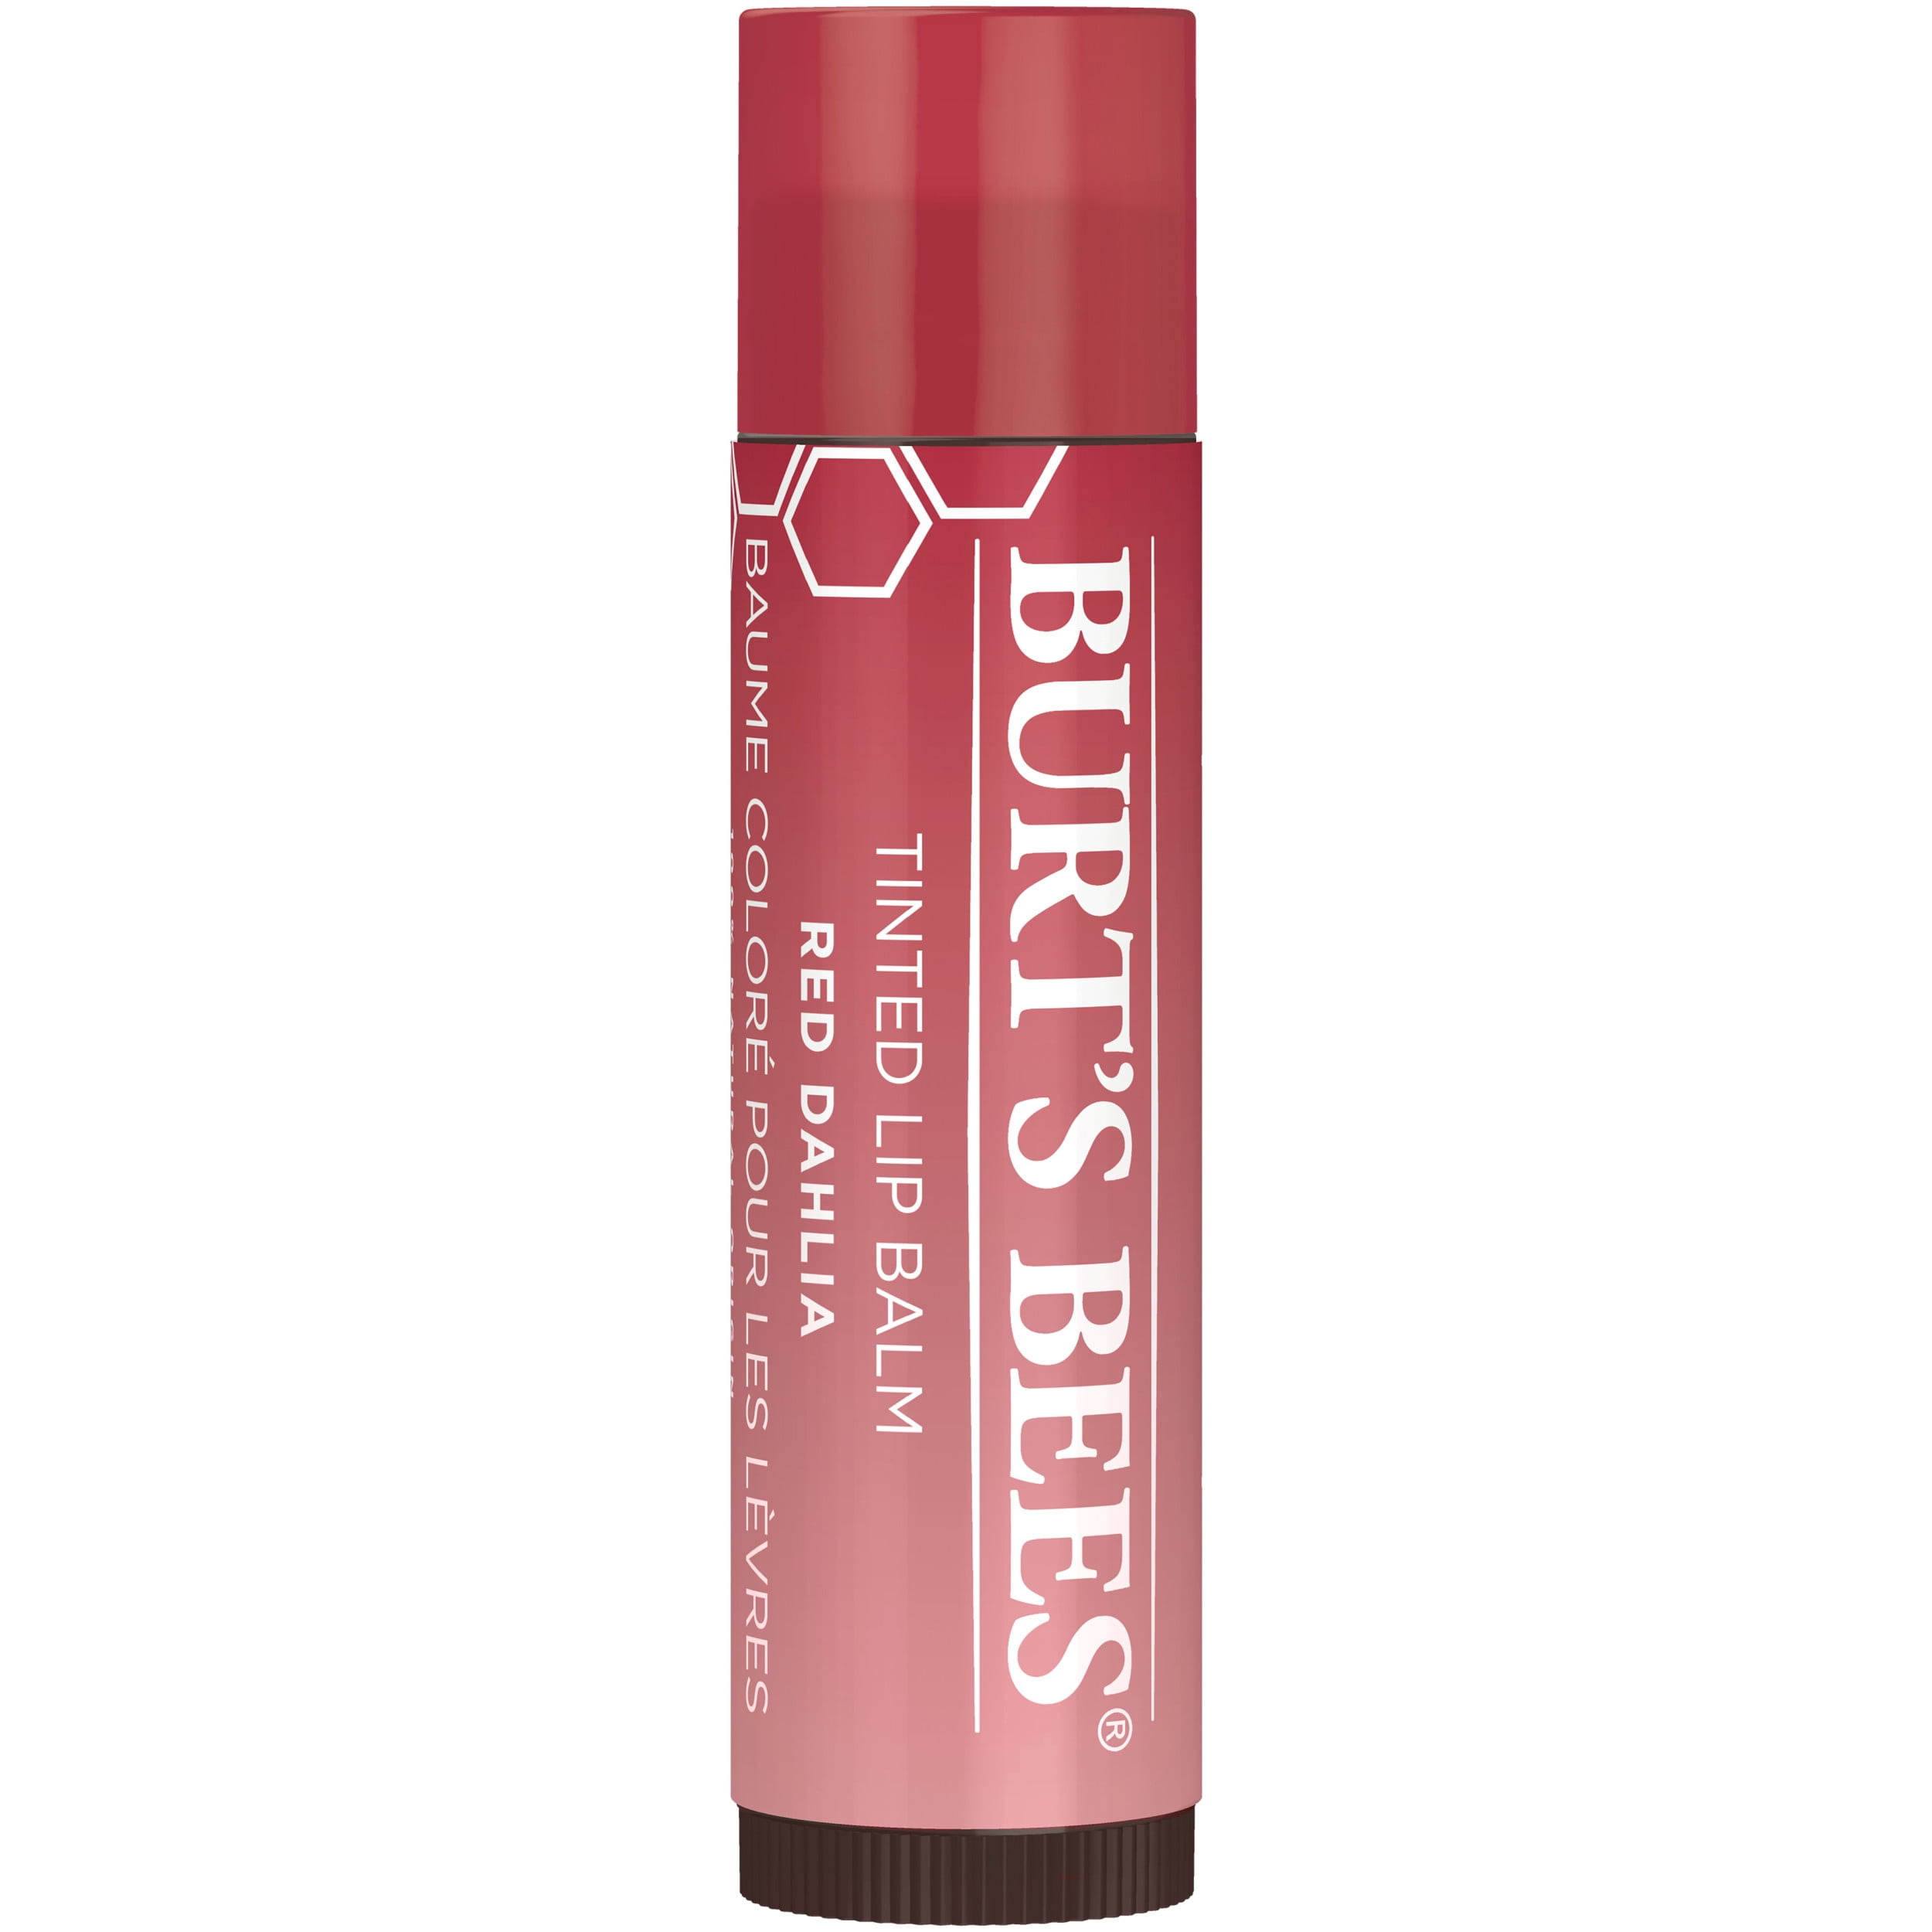  Burt's Bees Pink Grapefruit, Mango, Coconut and Pear, and  Pomegranate Lip Balm Pack, Lip Moisturizer With Responsibly Sourced  Beeswax, Tint-Free, Natural Conditioning Lip Treatment, 4 Tubes, 0.15 oz. :  Beauty